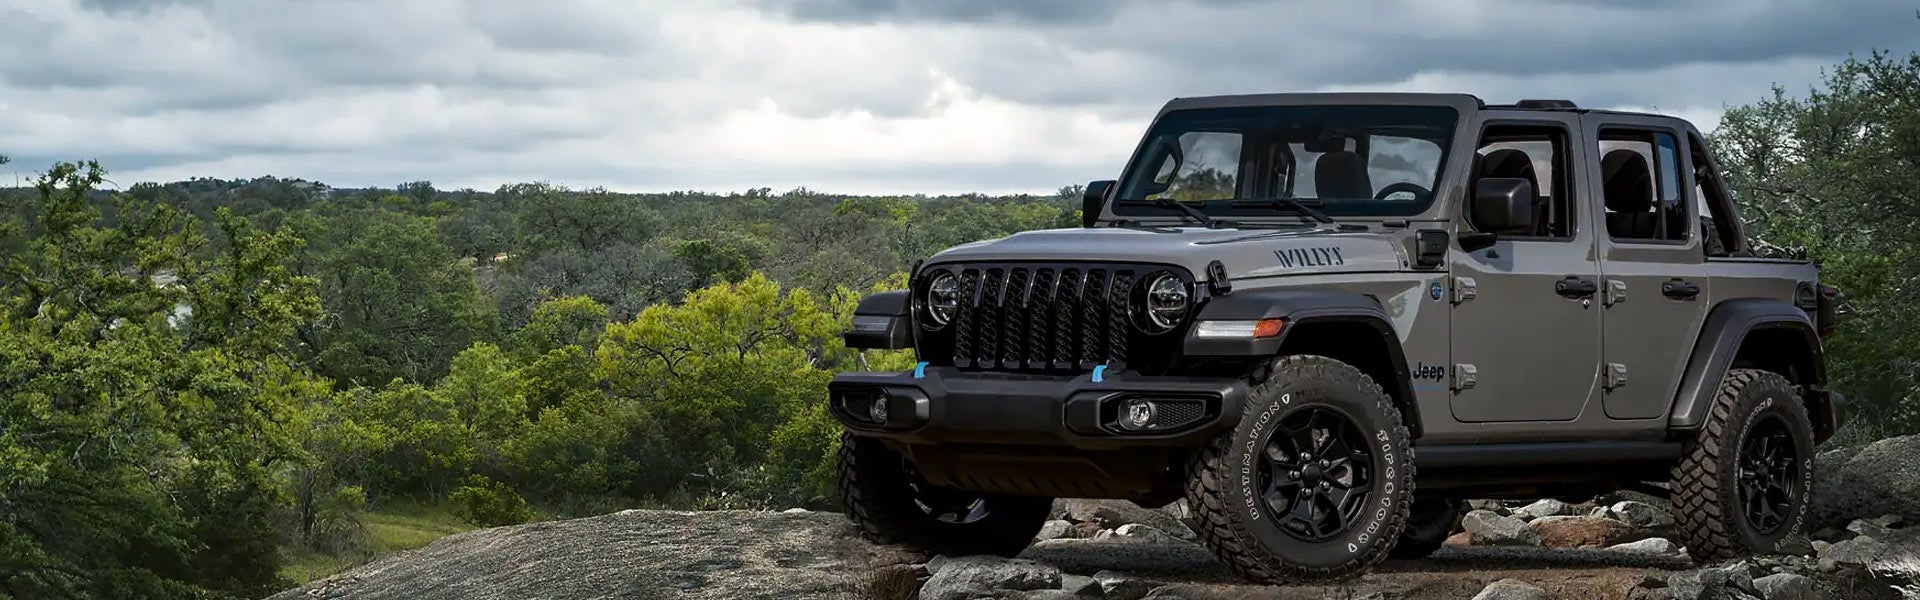 At a Glance: The 2023 Jeep Wrangler 4xe